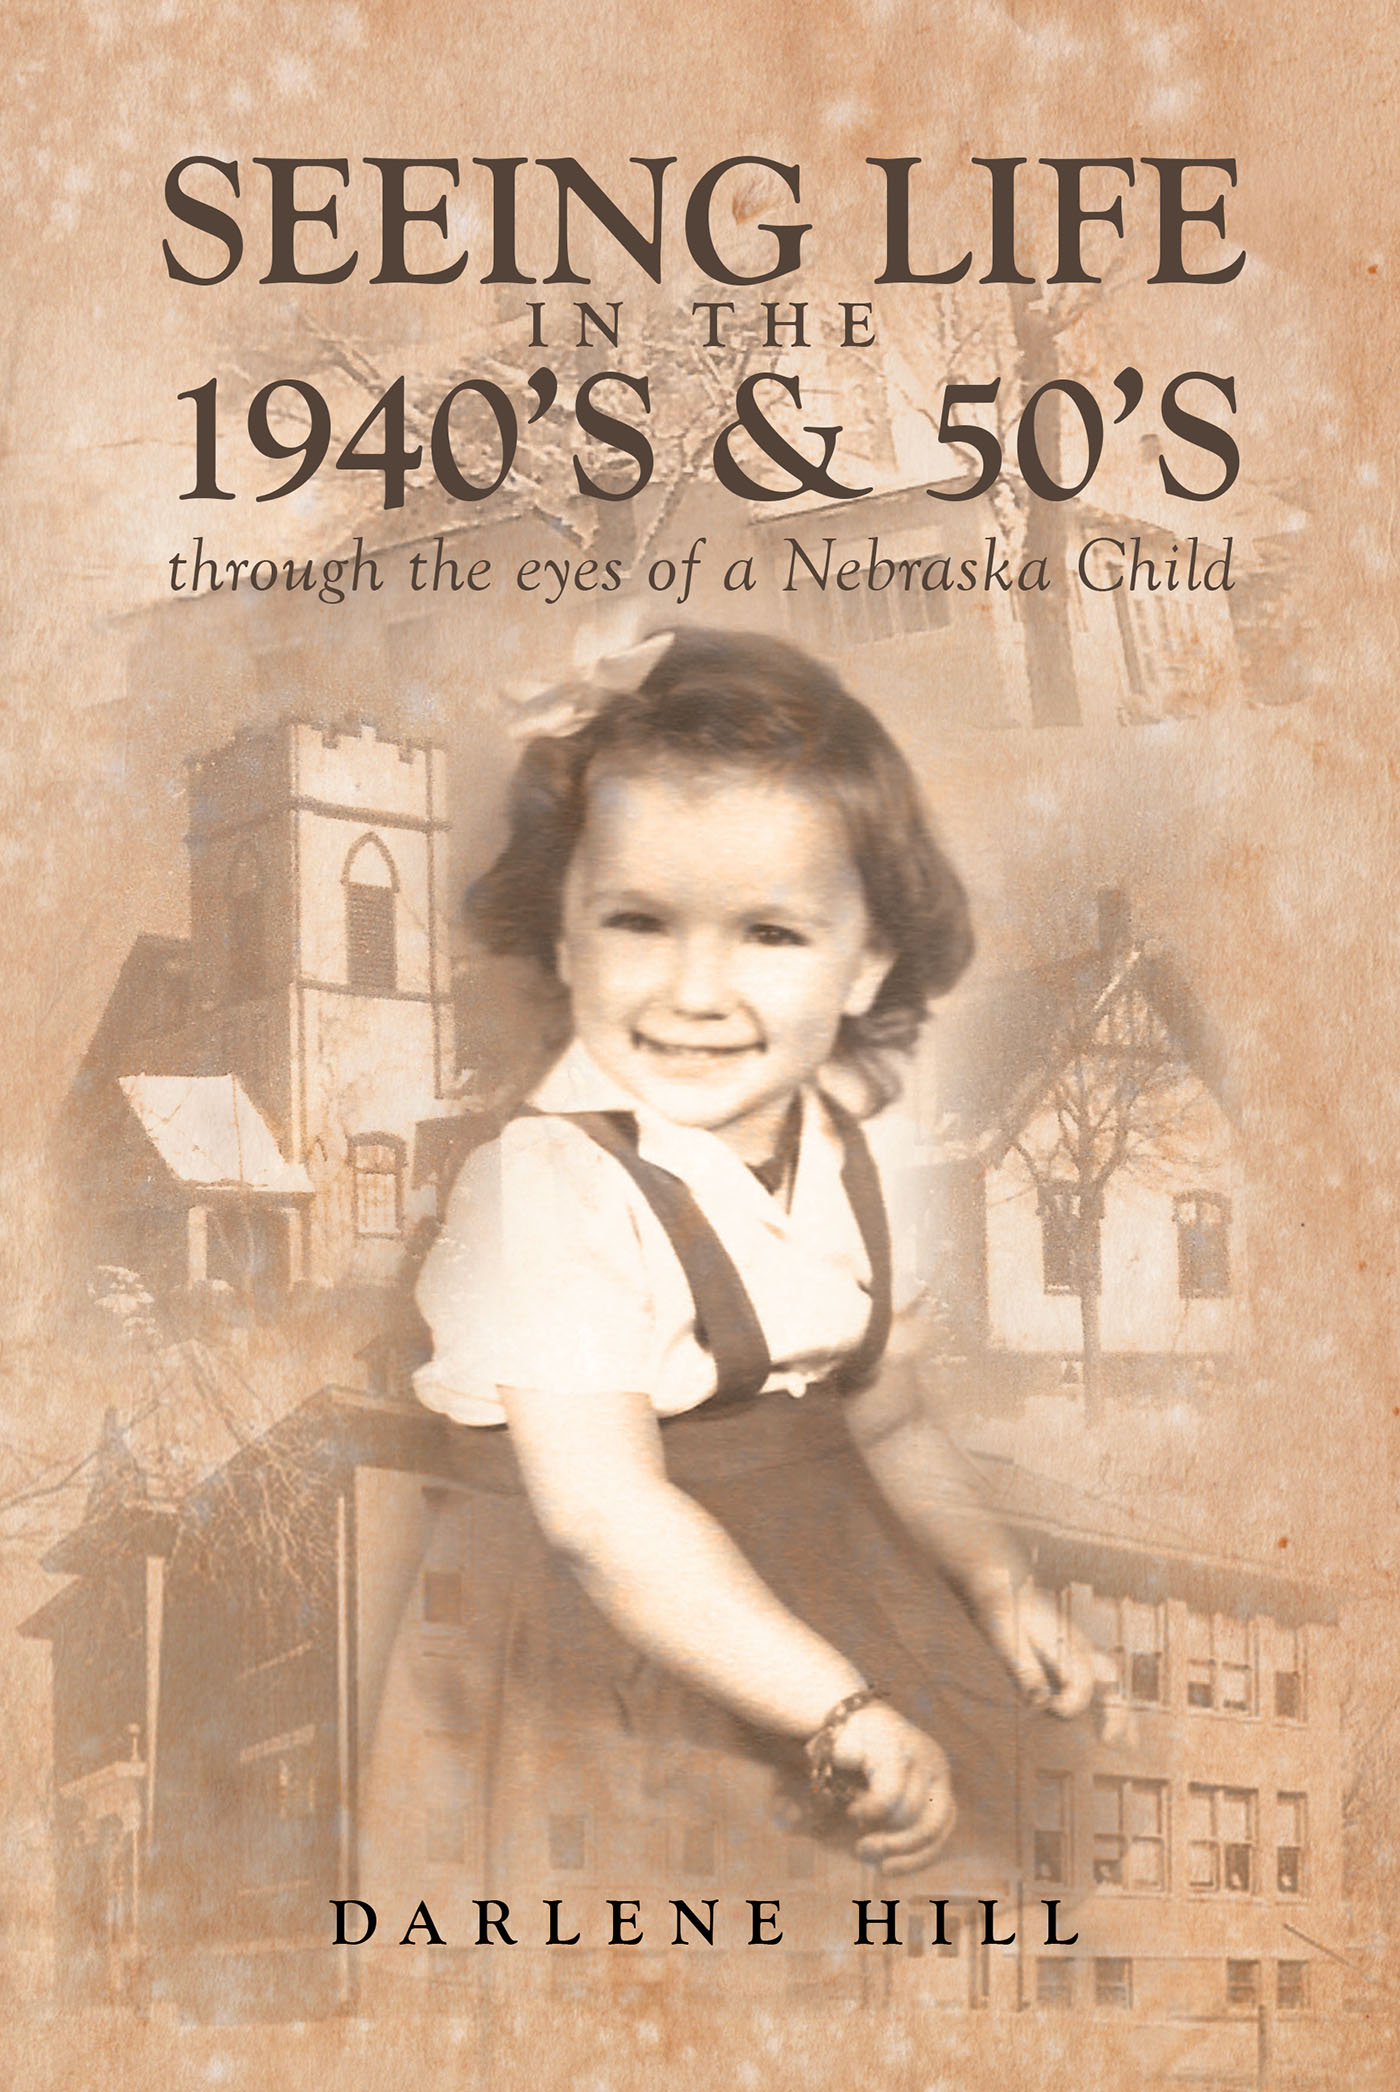 Seeing Life in the 1940s & 50s through the eyes of a Nebraska Child Cover Image